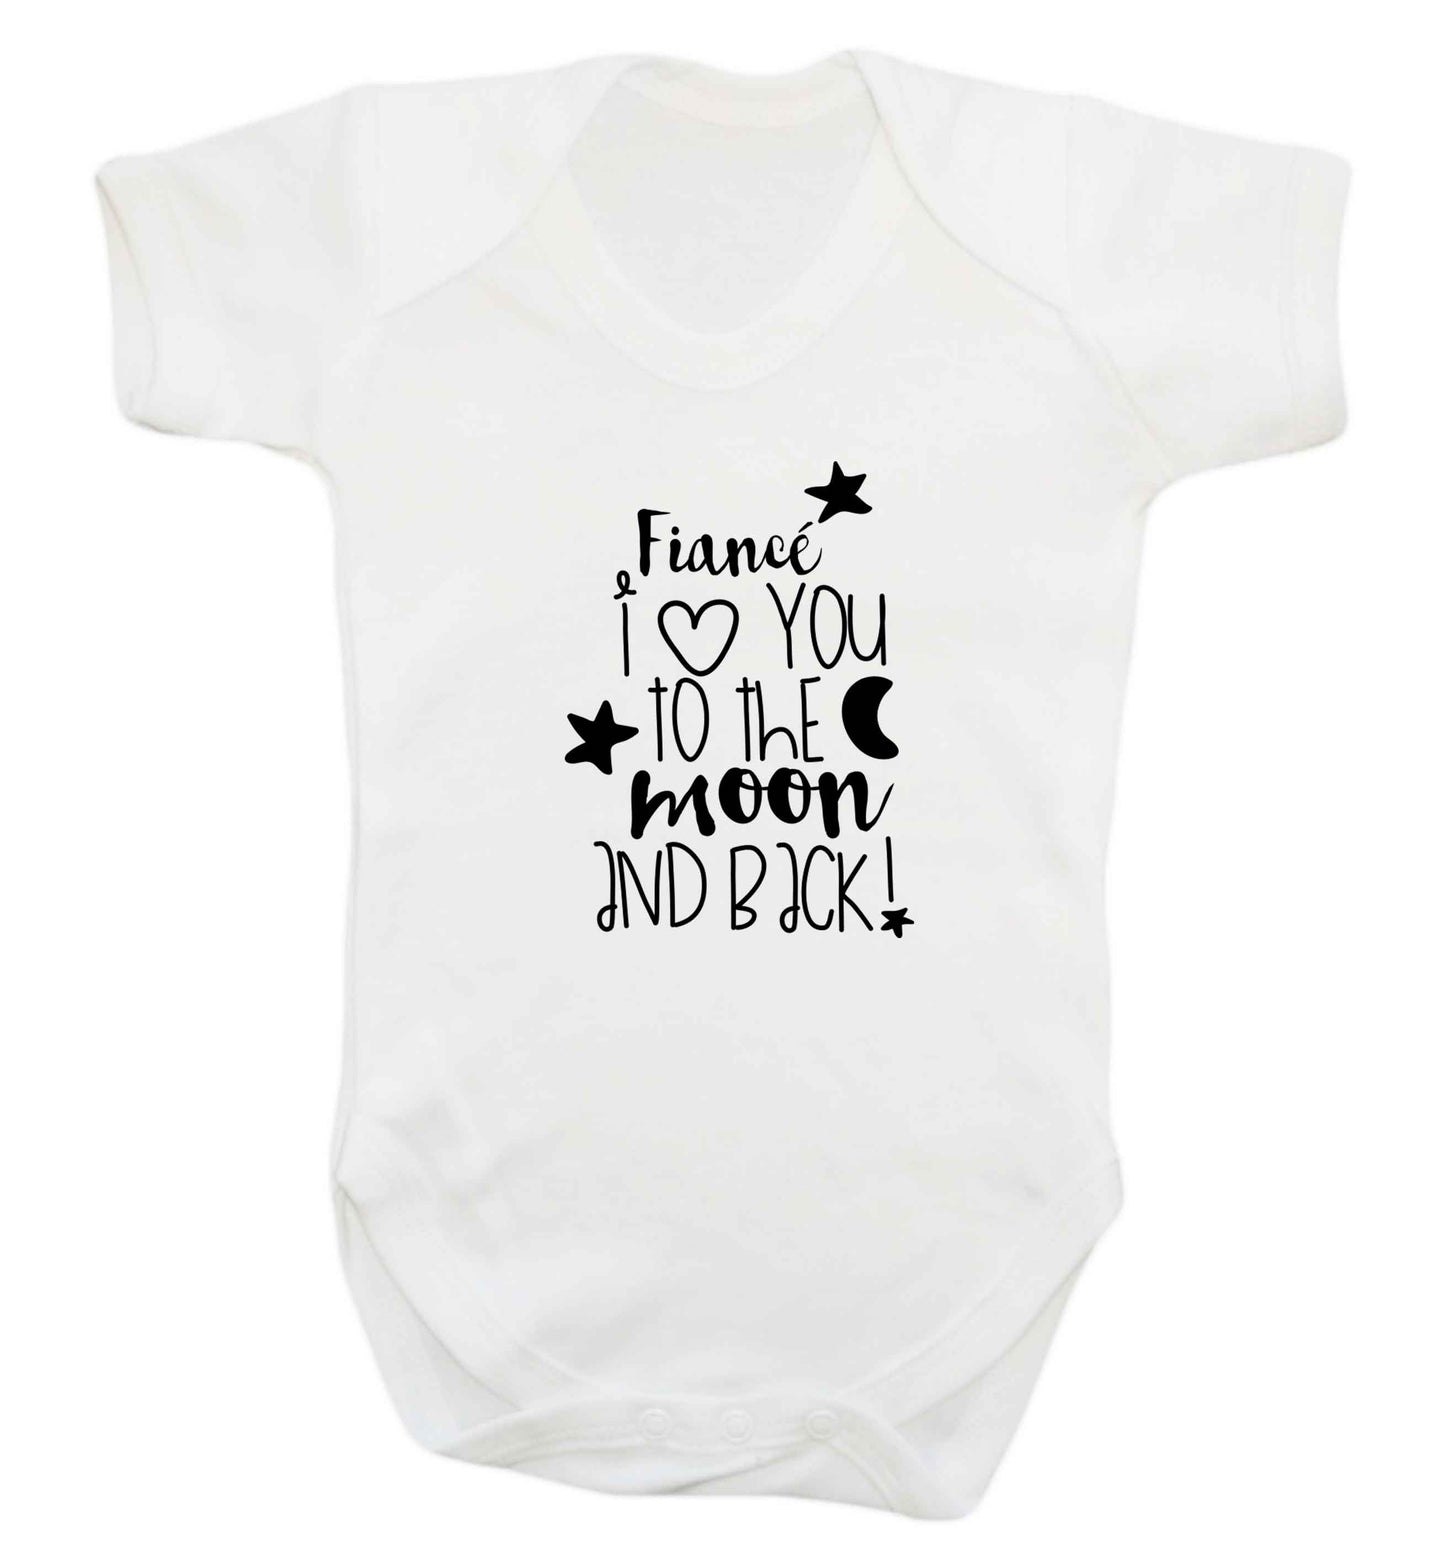 Fianc√© I love you to the moon and back baby vest white 18-24 months